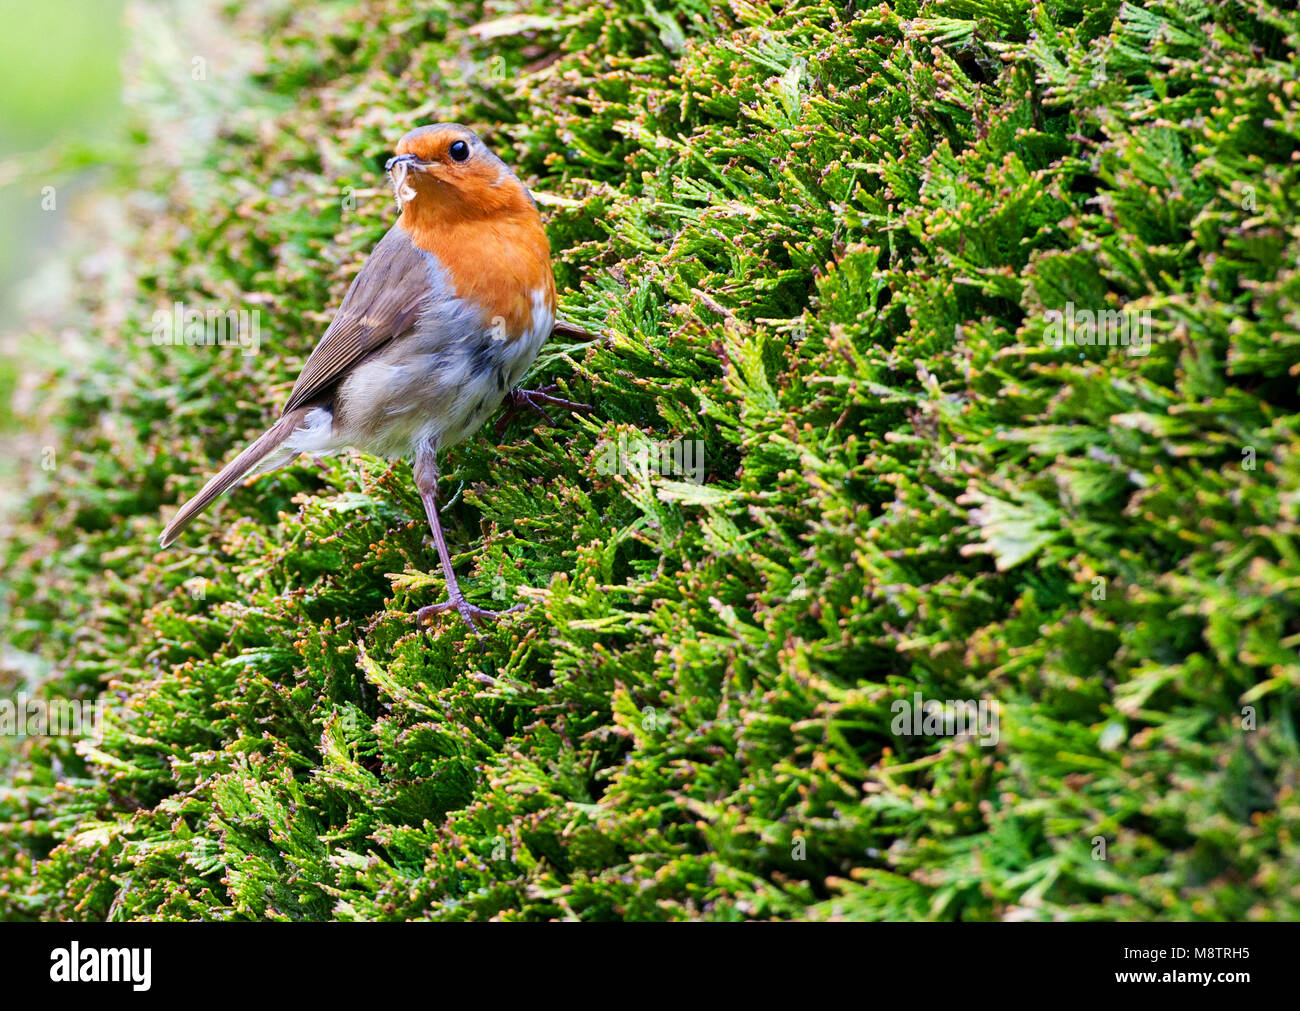 Roodborst zittend in de heg; European Robin perched in hedge Stock Photo